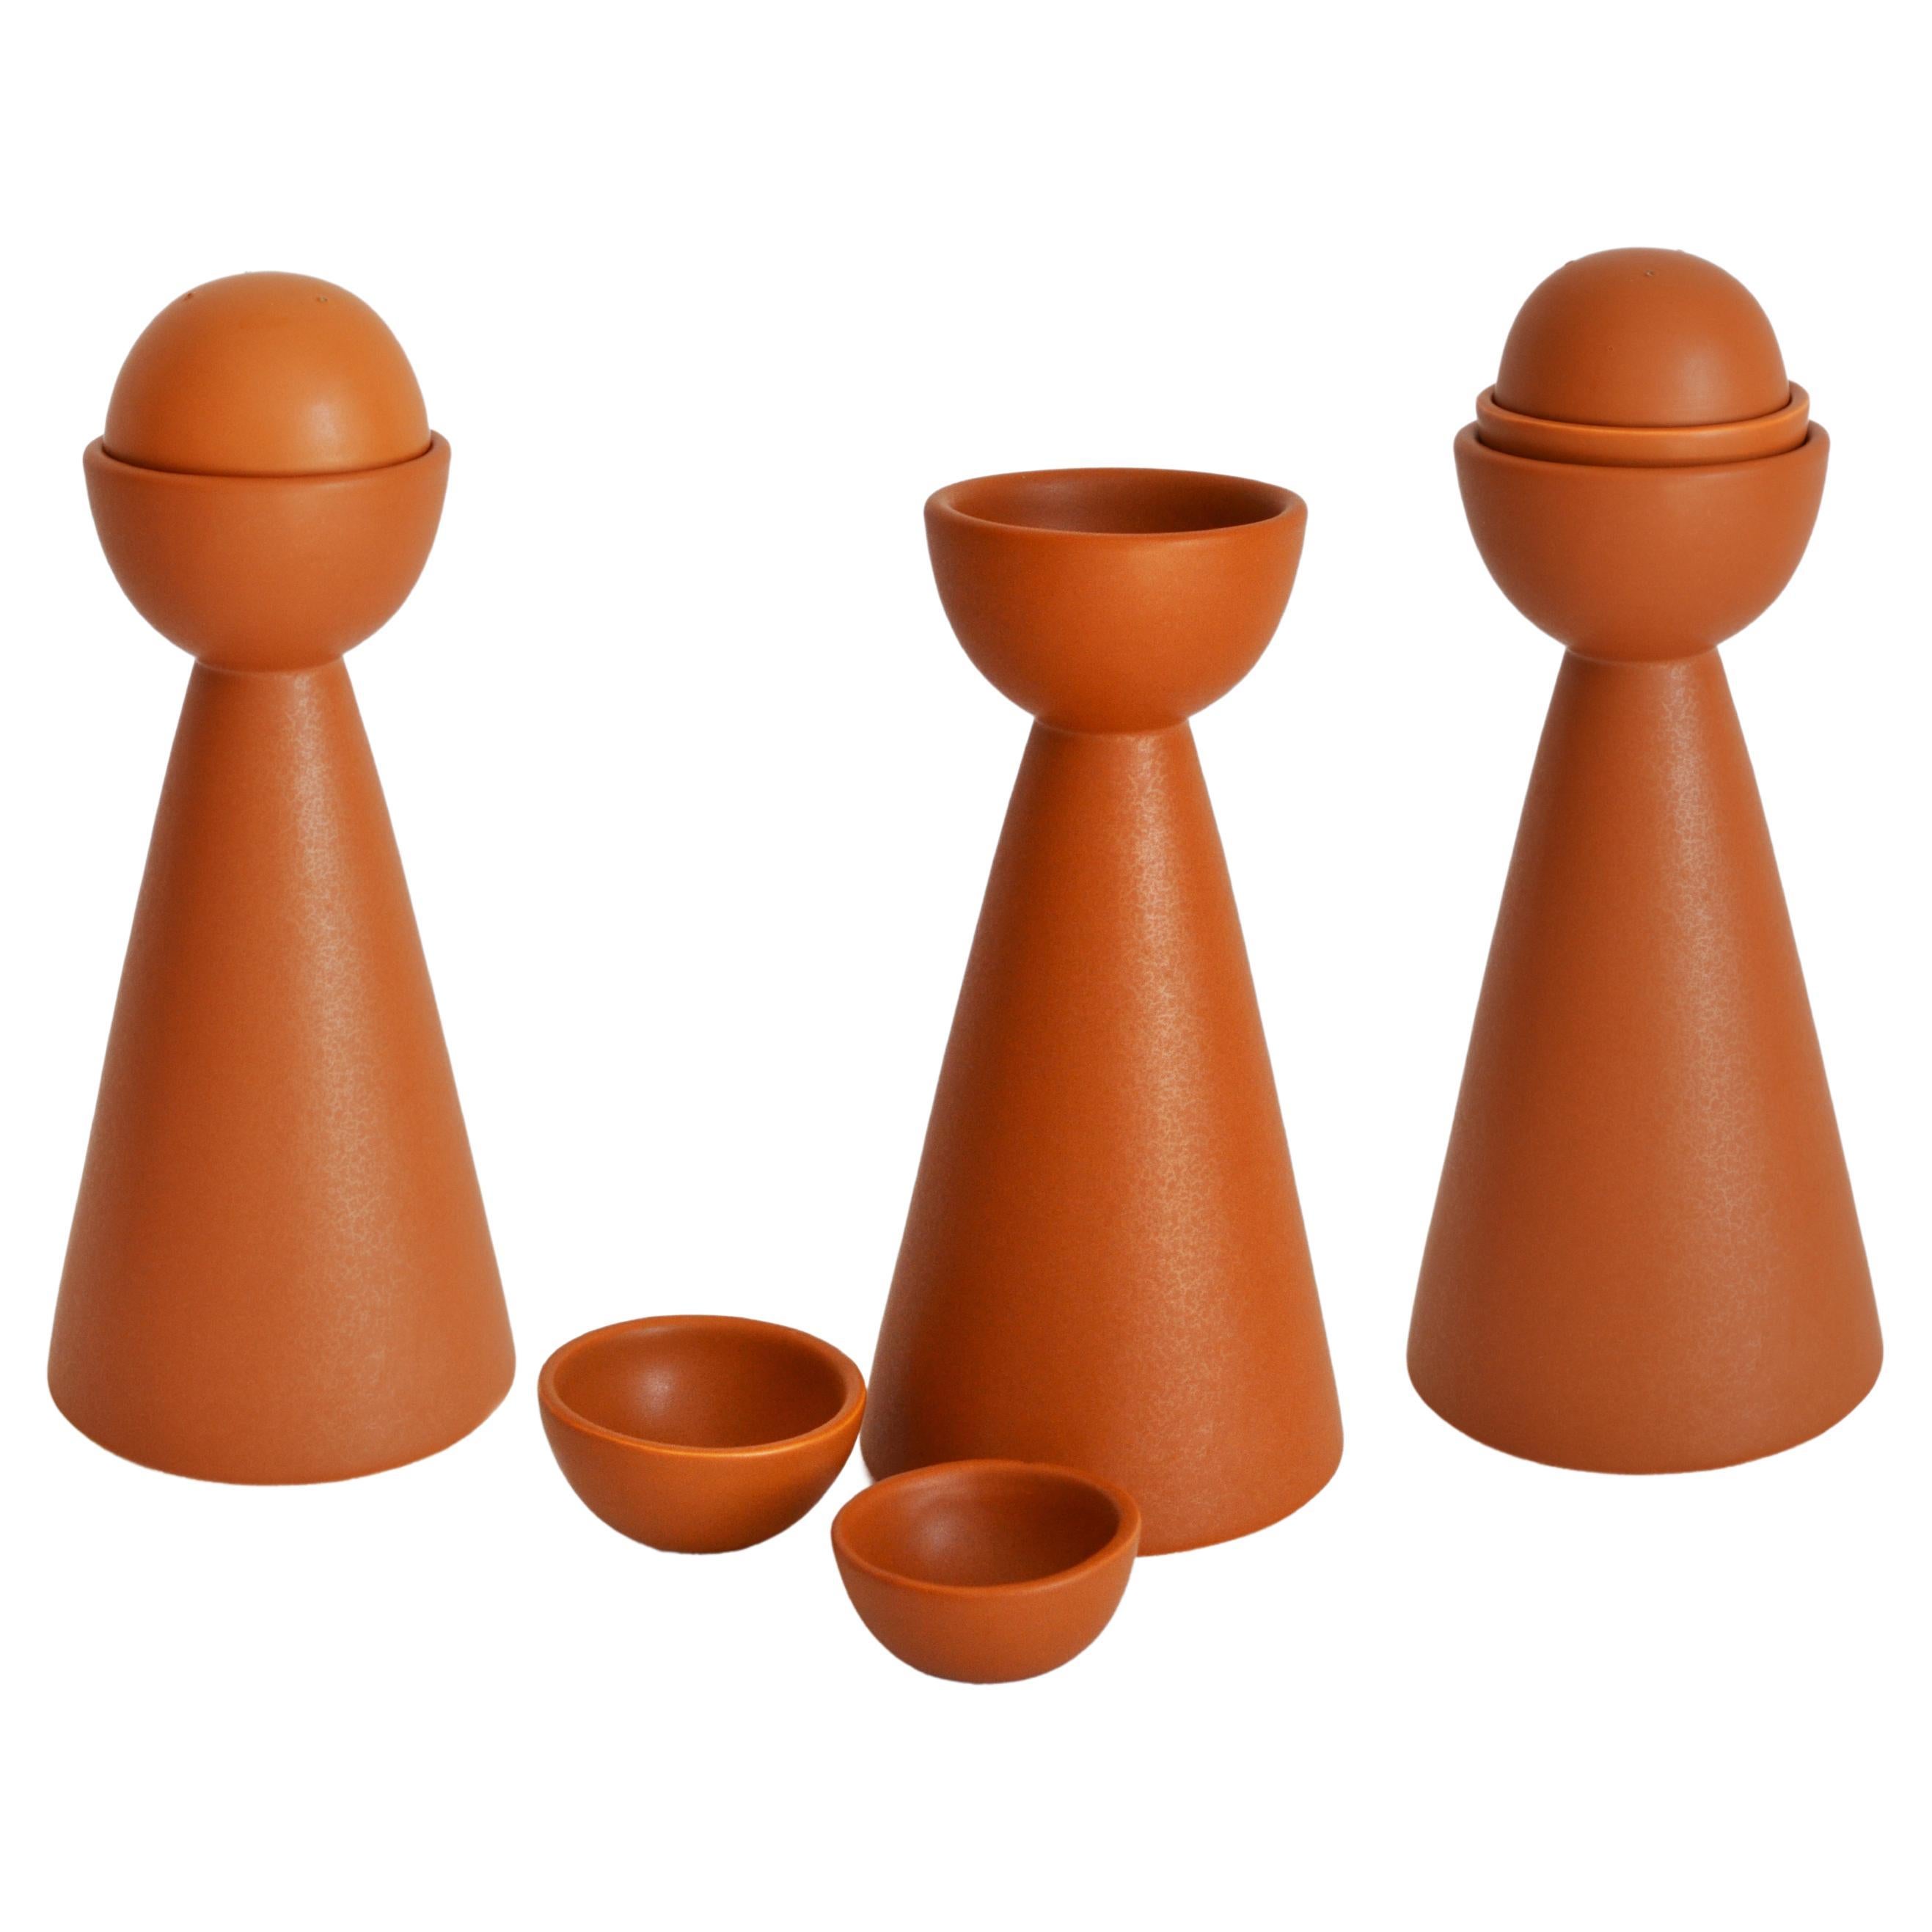 Set includes - 1 bottle and 2 cups

Our carafe colection is a tribute to the traditional pitchers of the regions of Tonala´ and Tlaquepaque in Jalisco, these two regions developed during the period of the conquest as pottery centers.

Half Moon
The